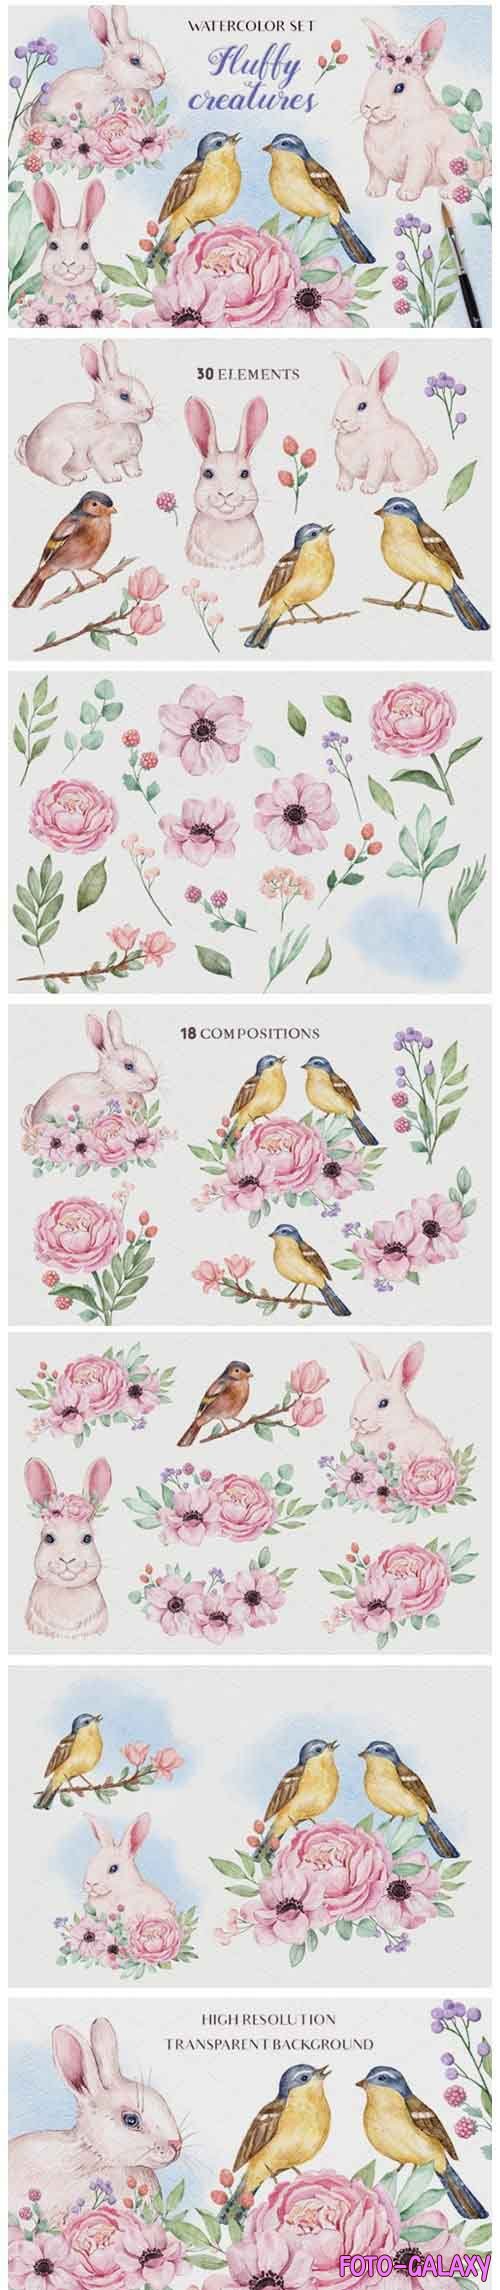 Fluffy Creatures - Watercolor Set - 5862626